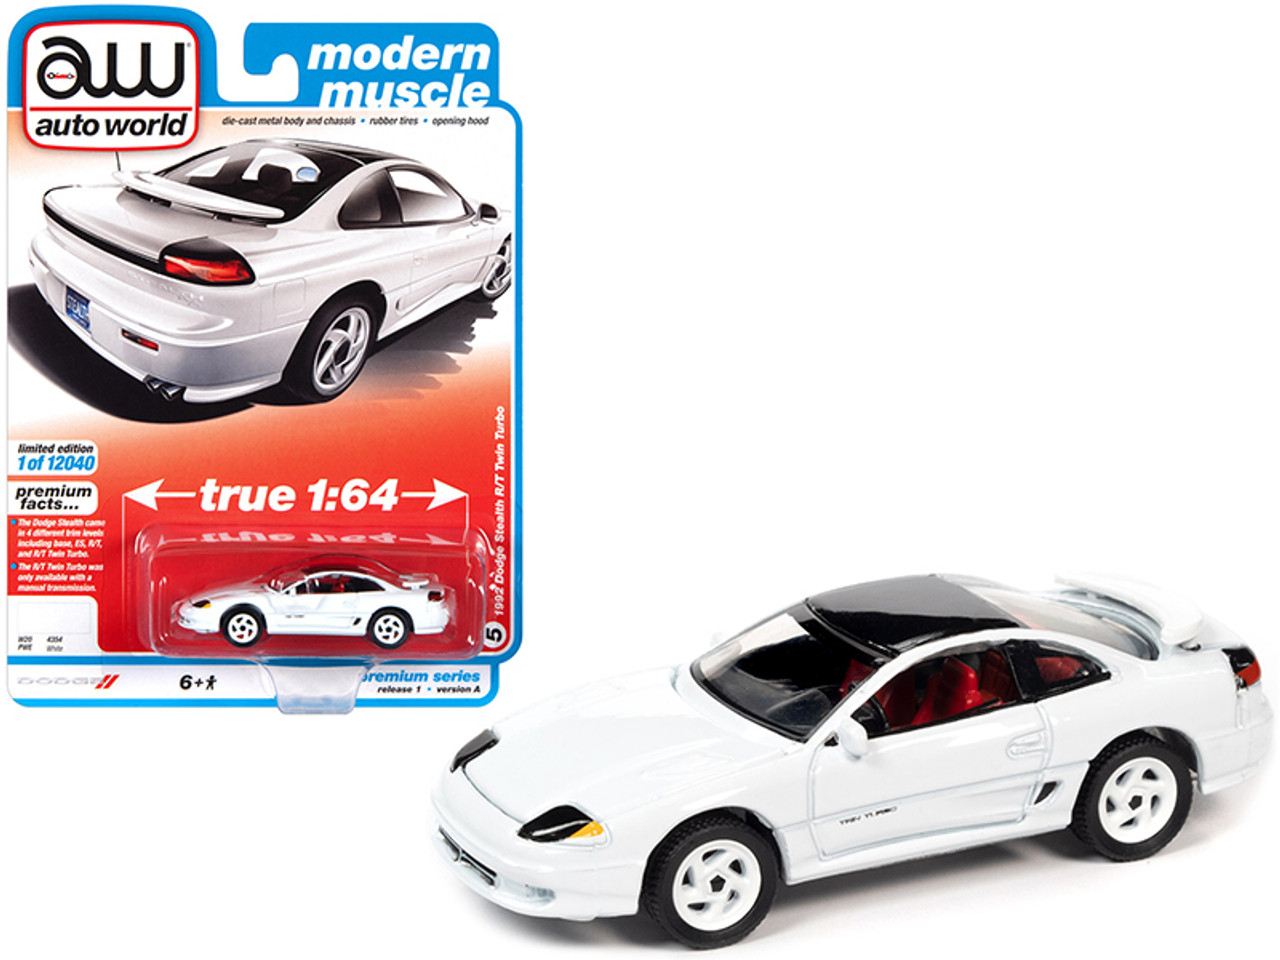 1992 Dodge Stealth R/T Twin Turbo White with Black Top and Red Interior "Modern Muscle" Limited Edition to 12040 pieces Worldwide 1/64 Diecast Model Car by Autoworld